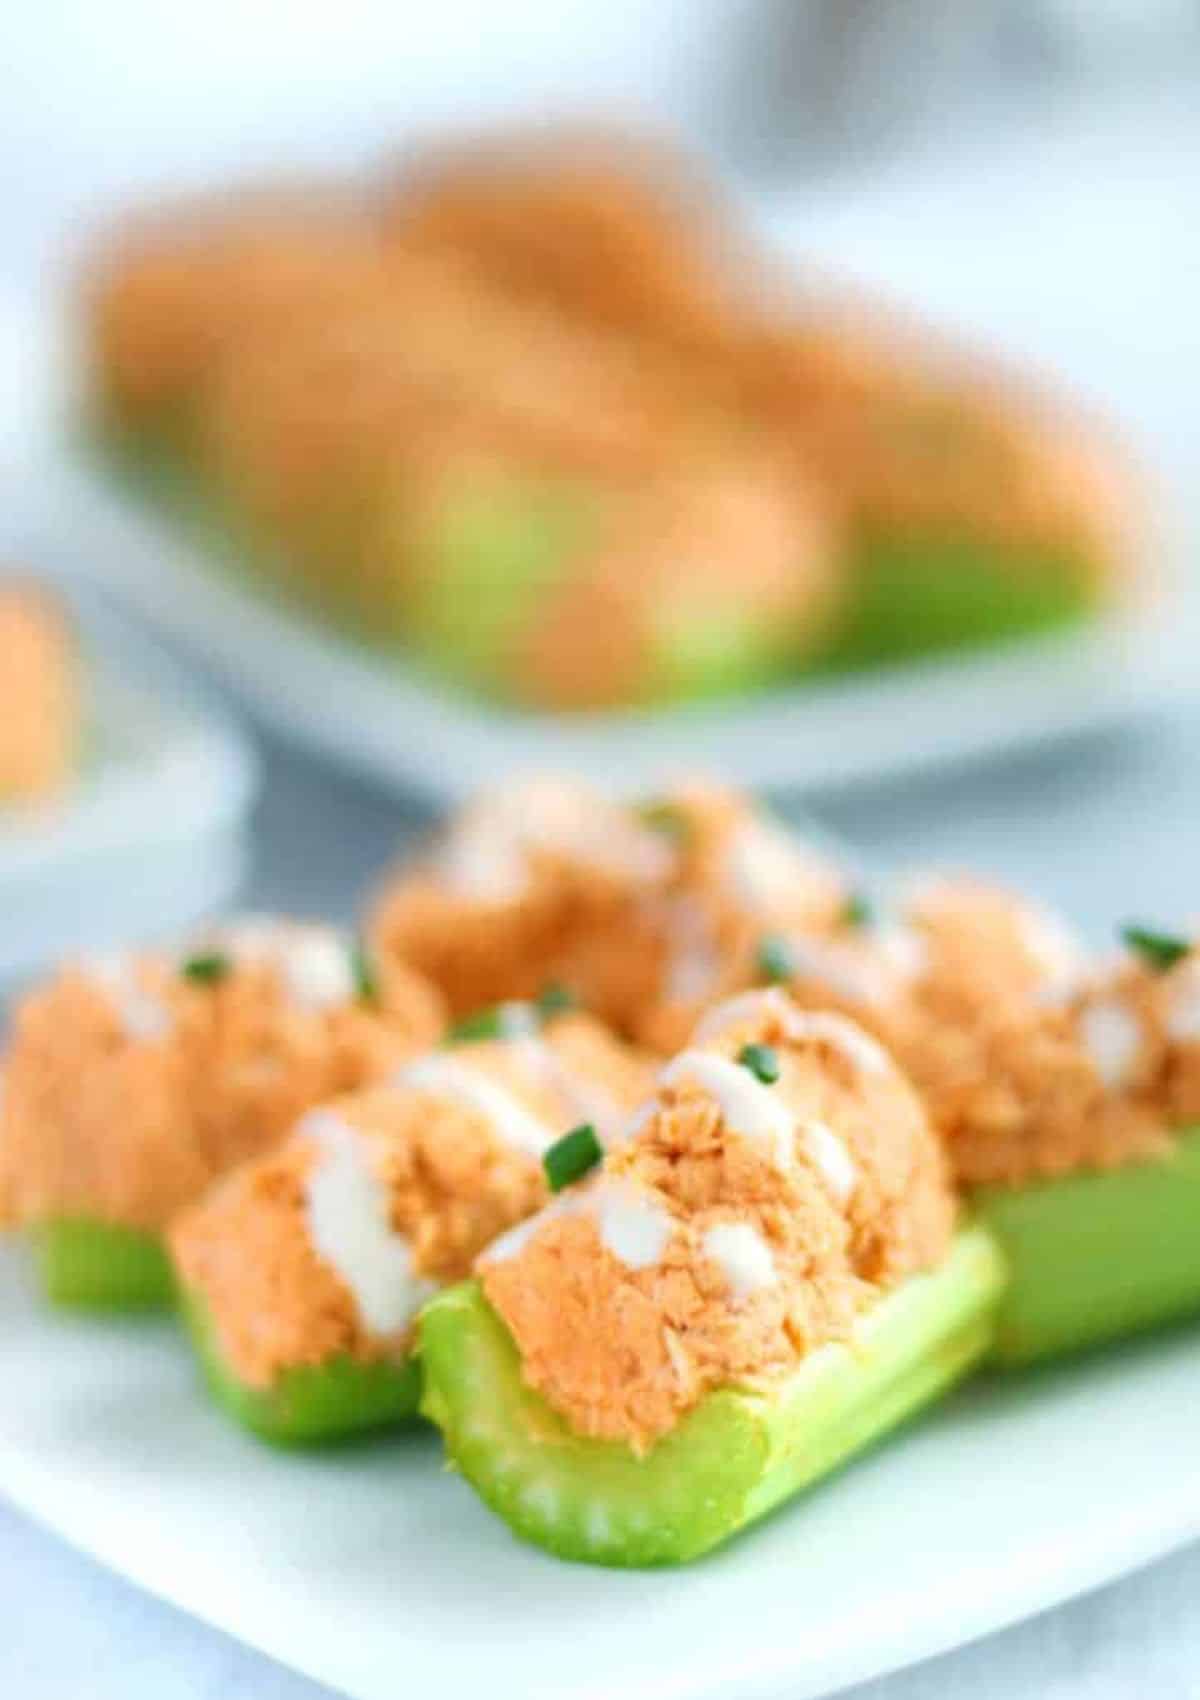 Orange colored tuna in celery sticks with ranch and chives on top)